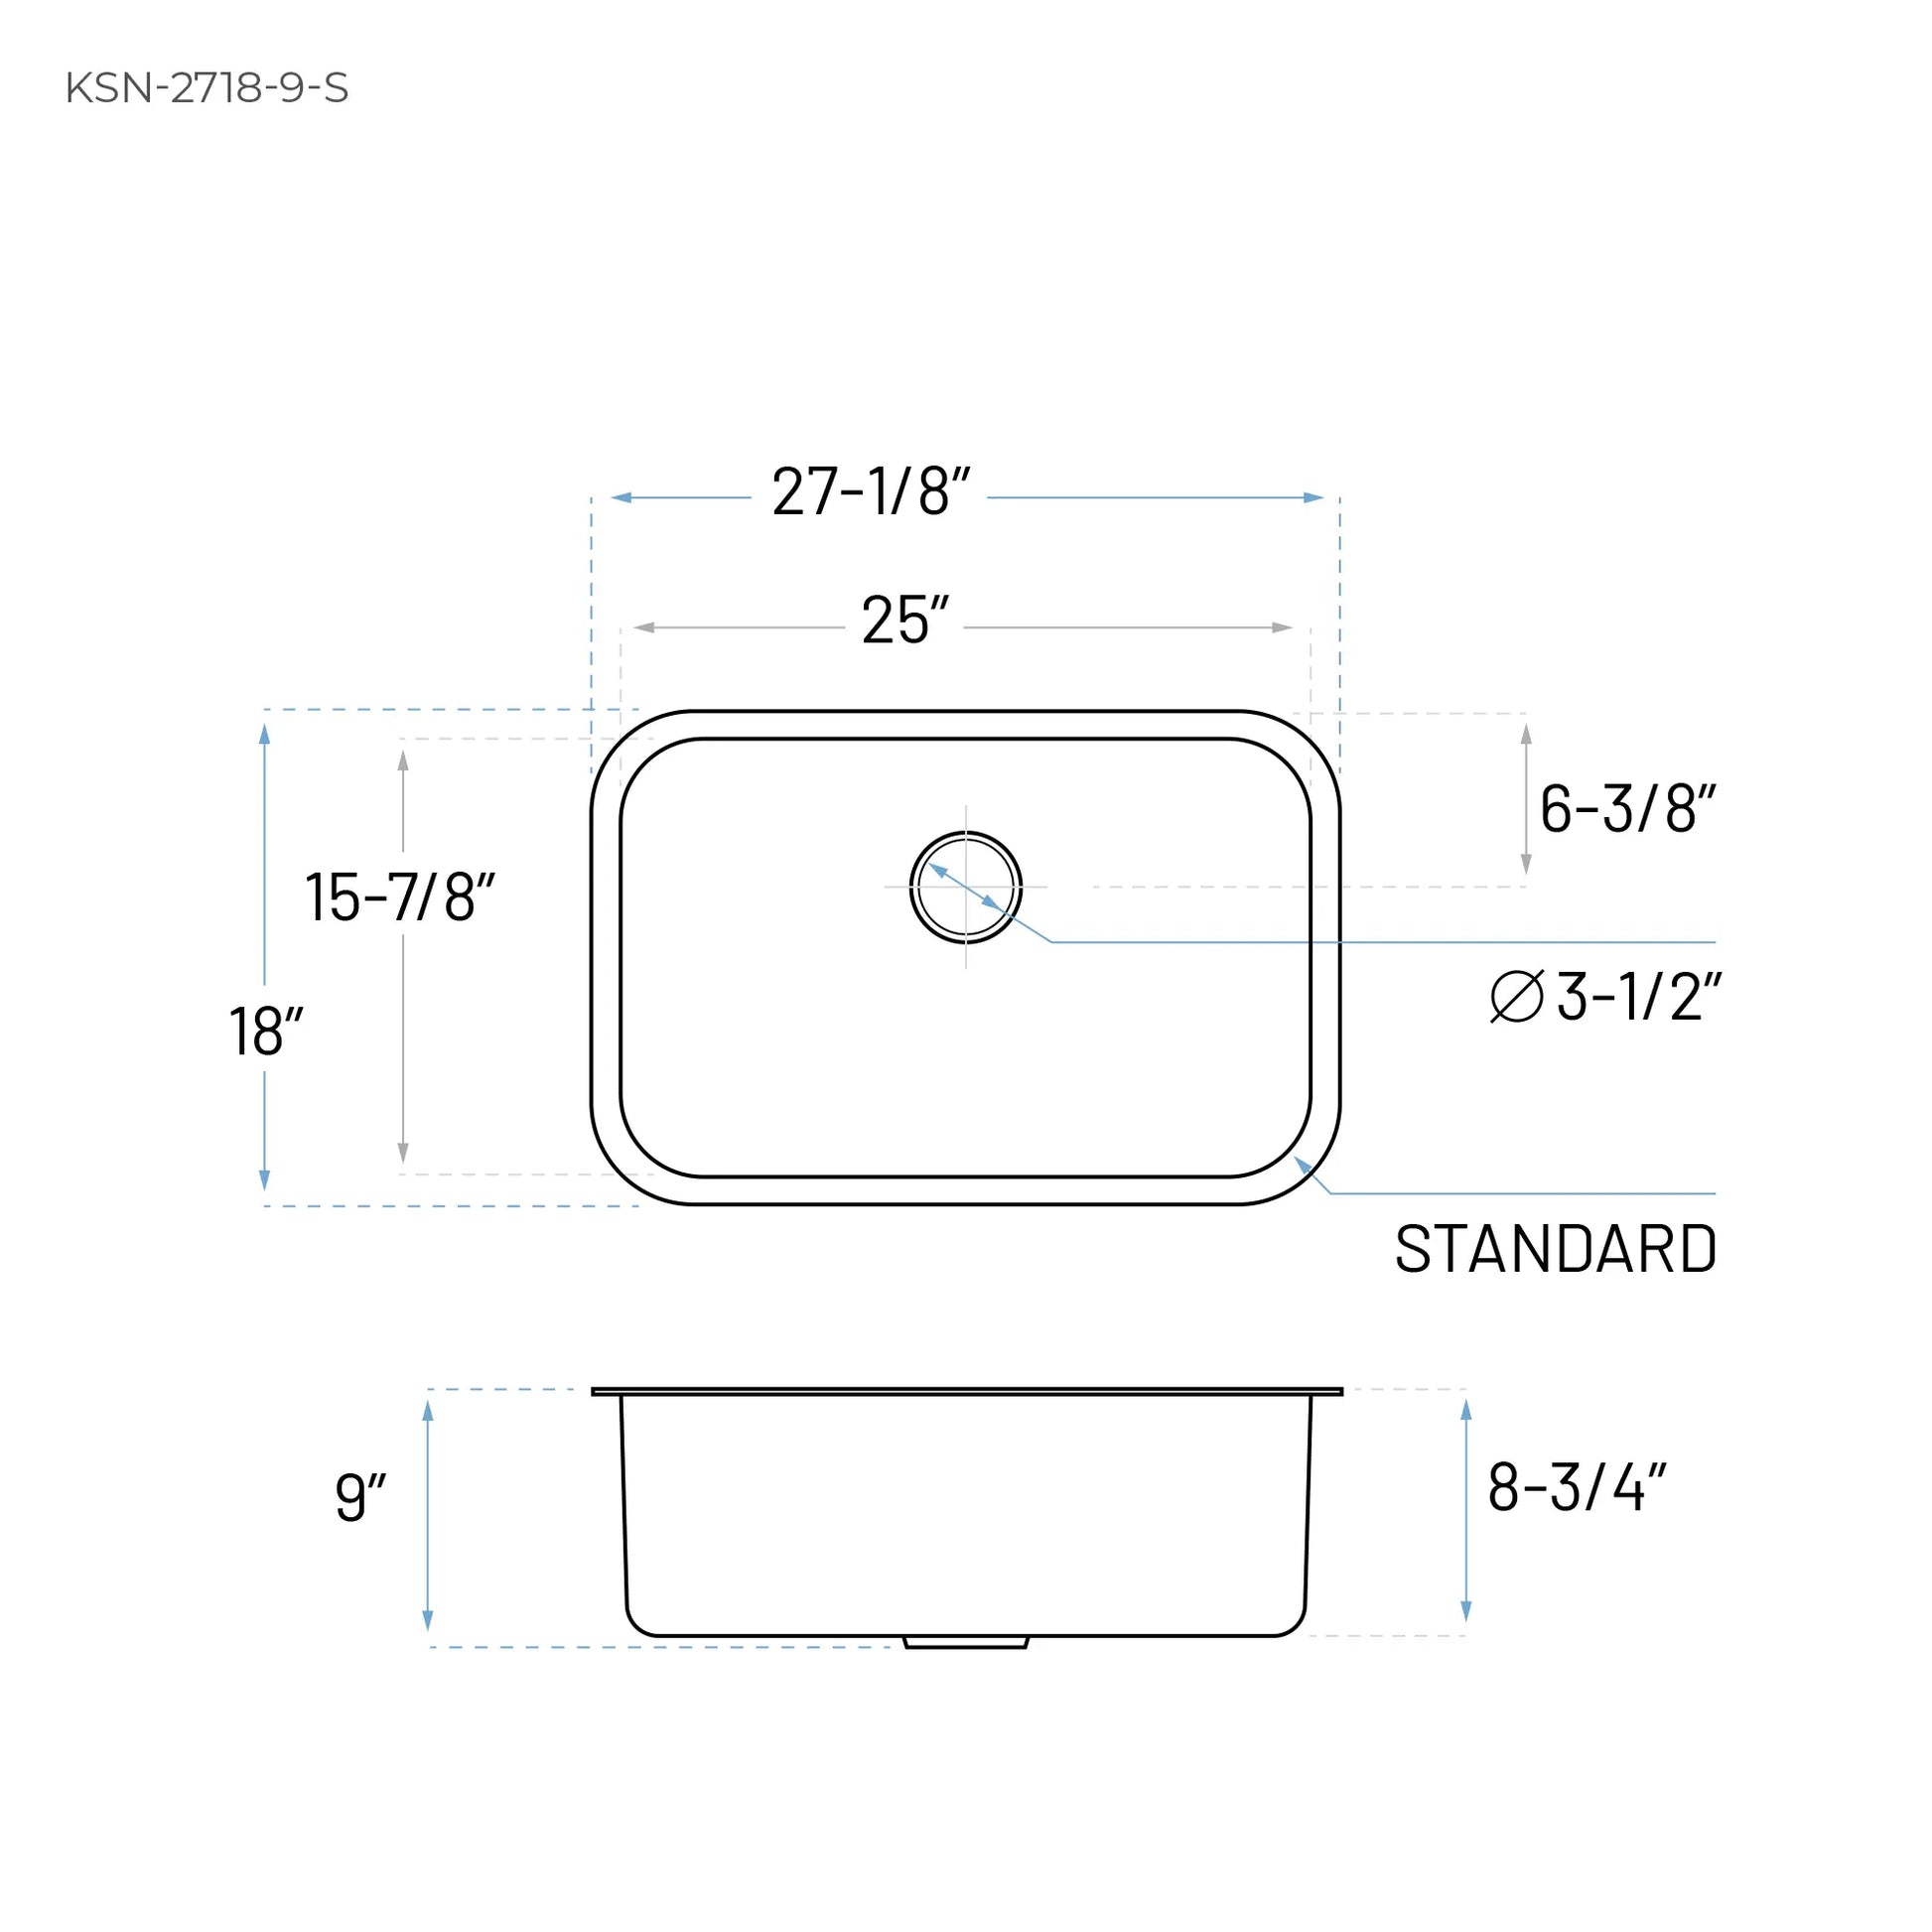 Technical Drawing of a Stainless Steel Undermount Kitchen Sink